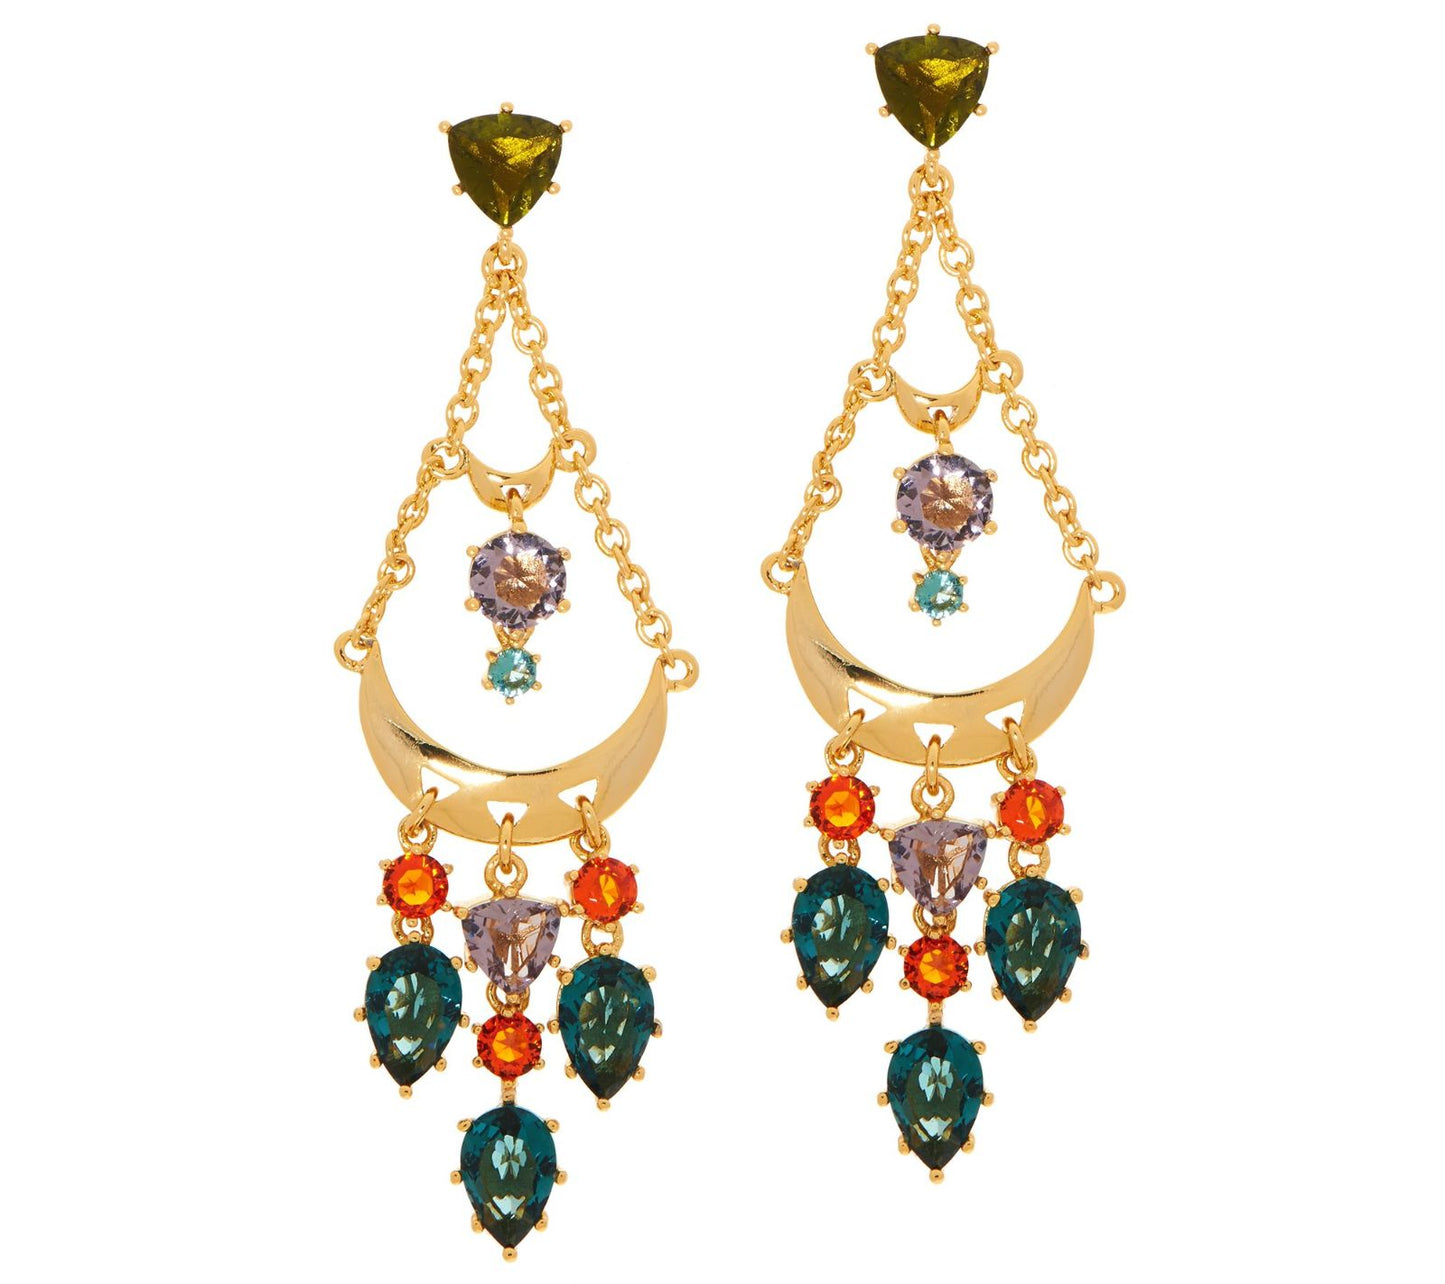 Pina Colada Chandelier Gold Tone Crystal Earrings